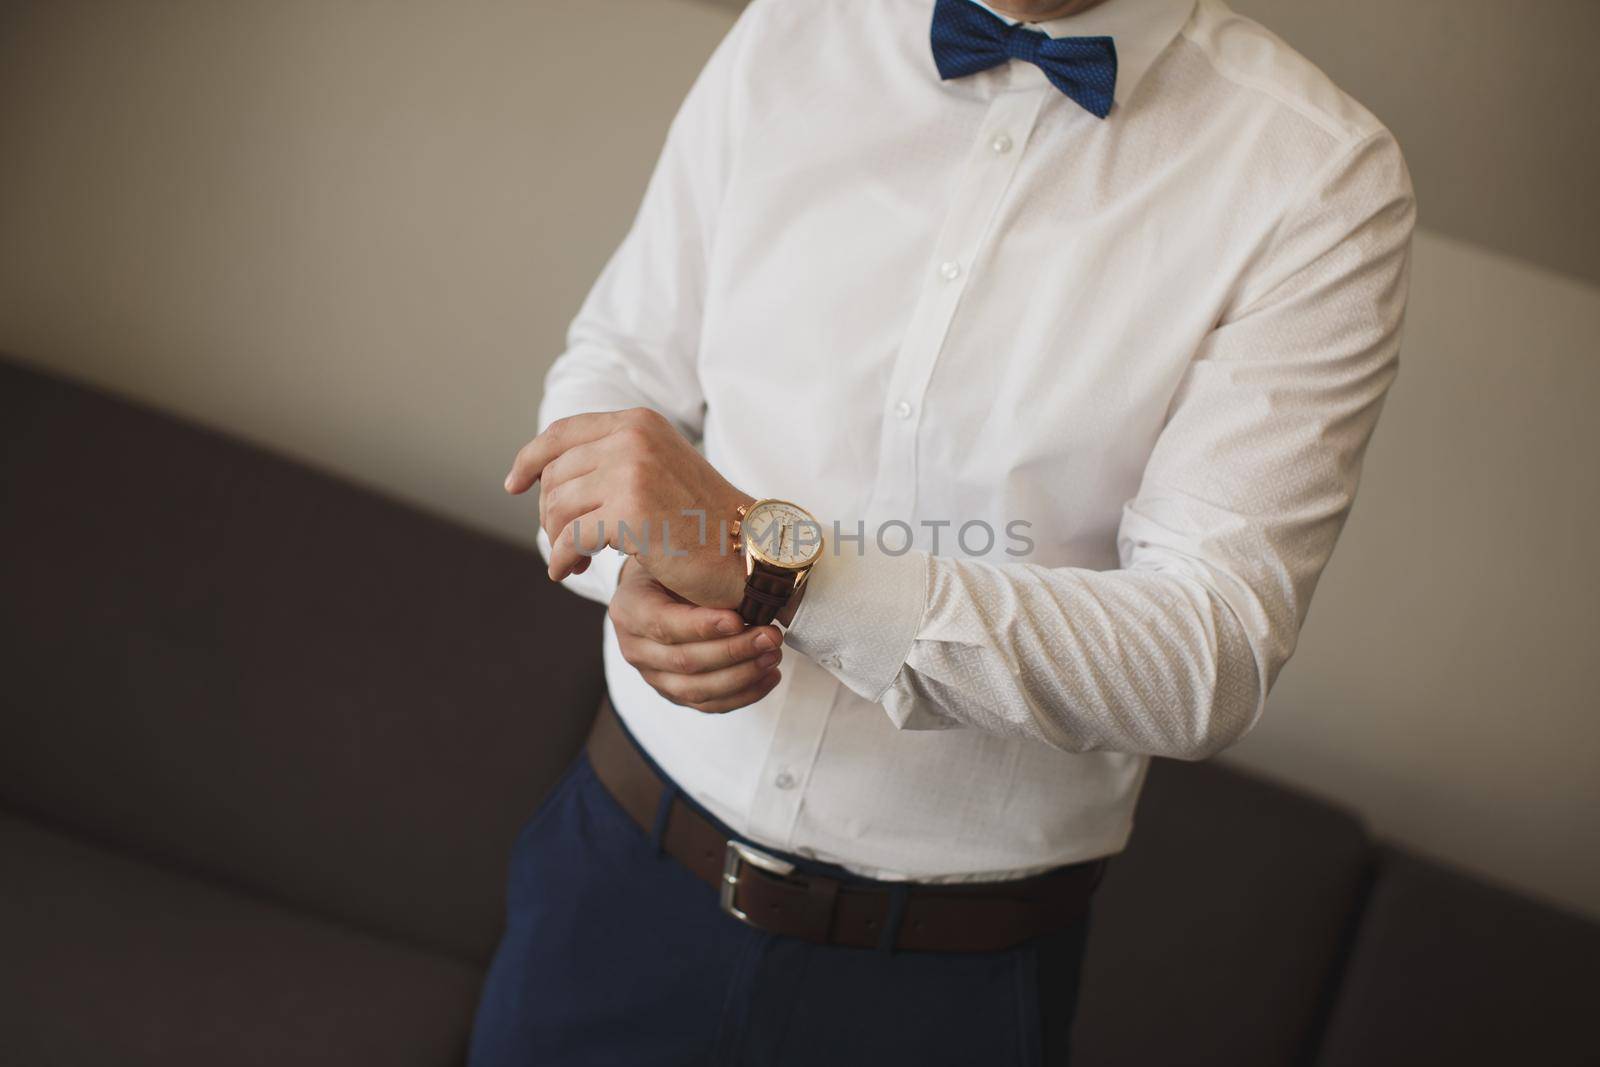 The groom's pack, who puts a watch on his hand by StudioPeace